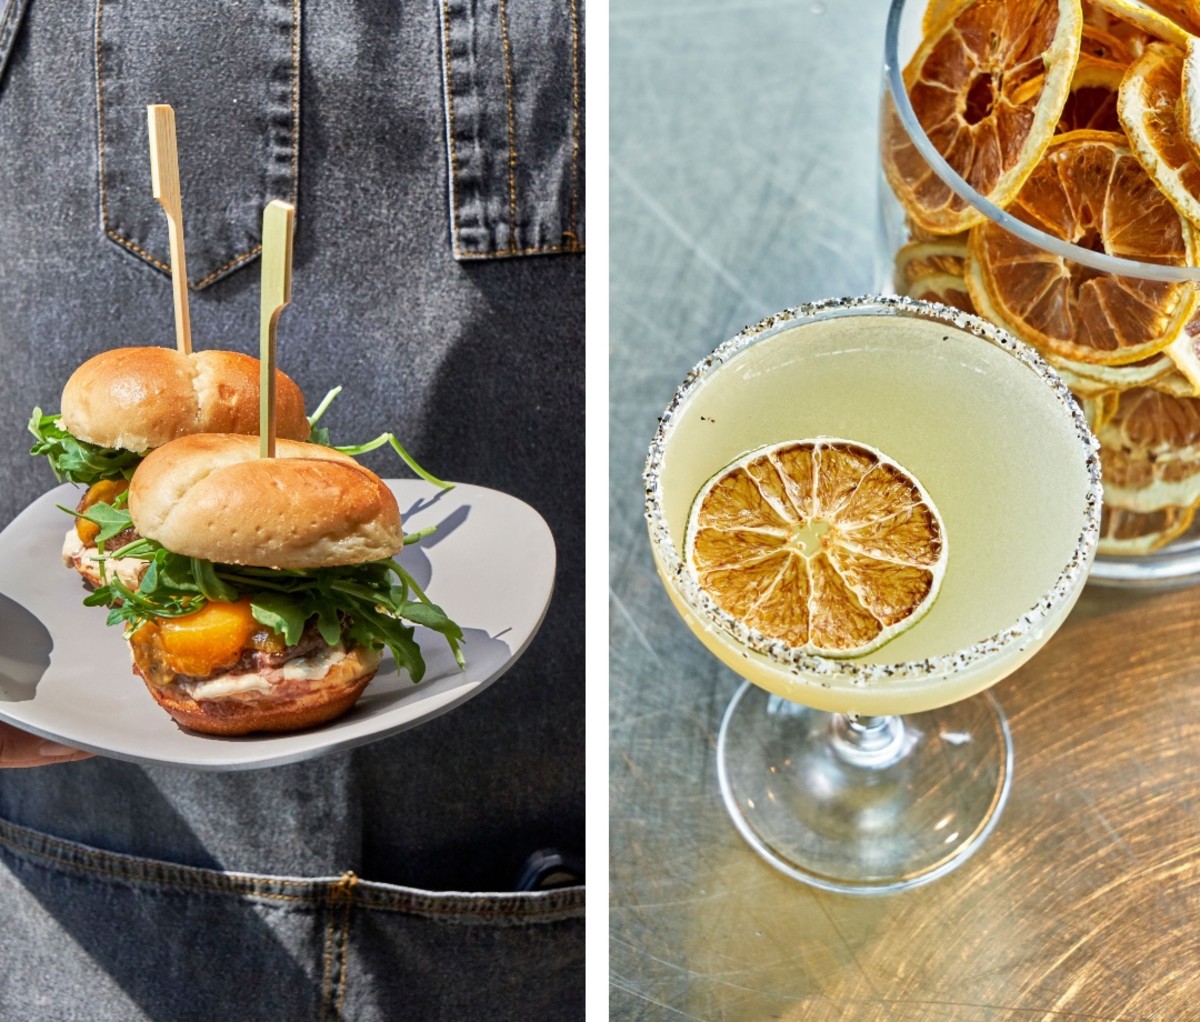 Sliders on plate in image on left and cocktail with dried orange slice in right